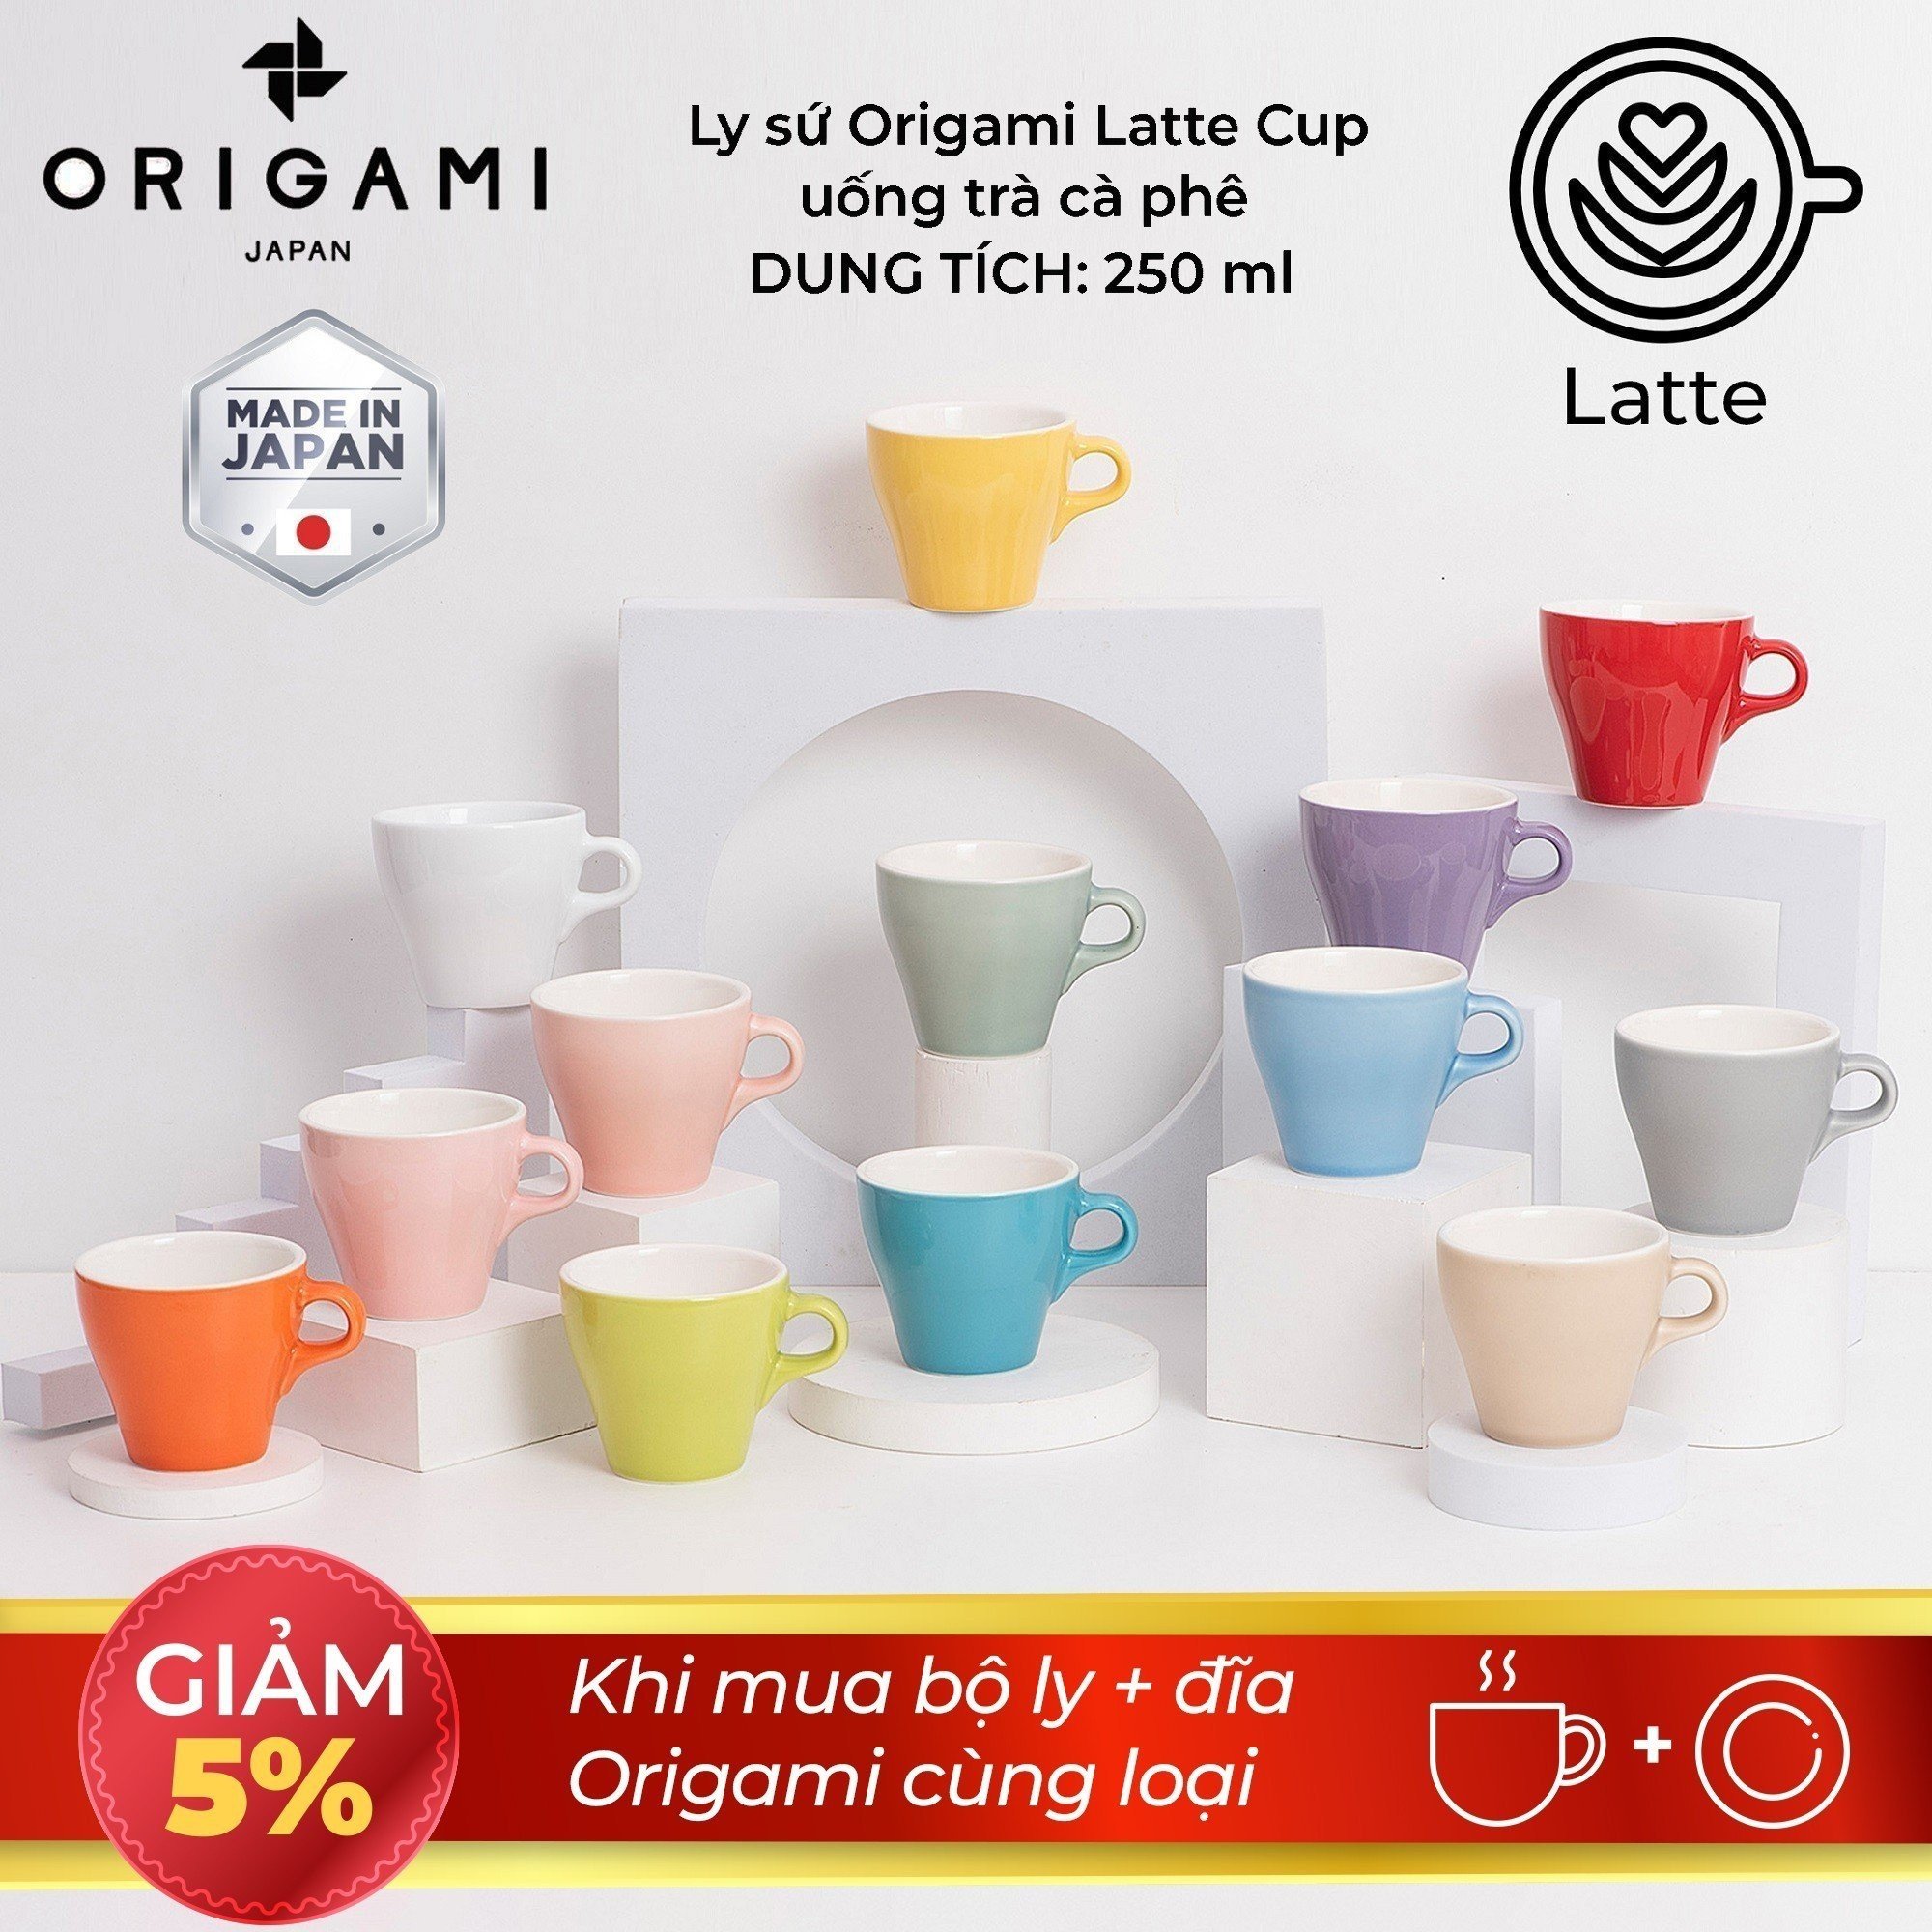 Japan Origami 8oz Latte Coffee Cup Saucer Set(Gift Box) Pink